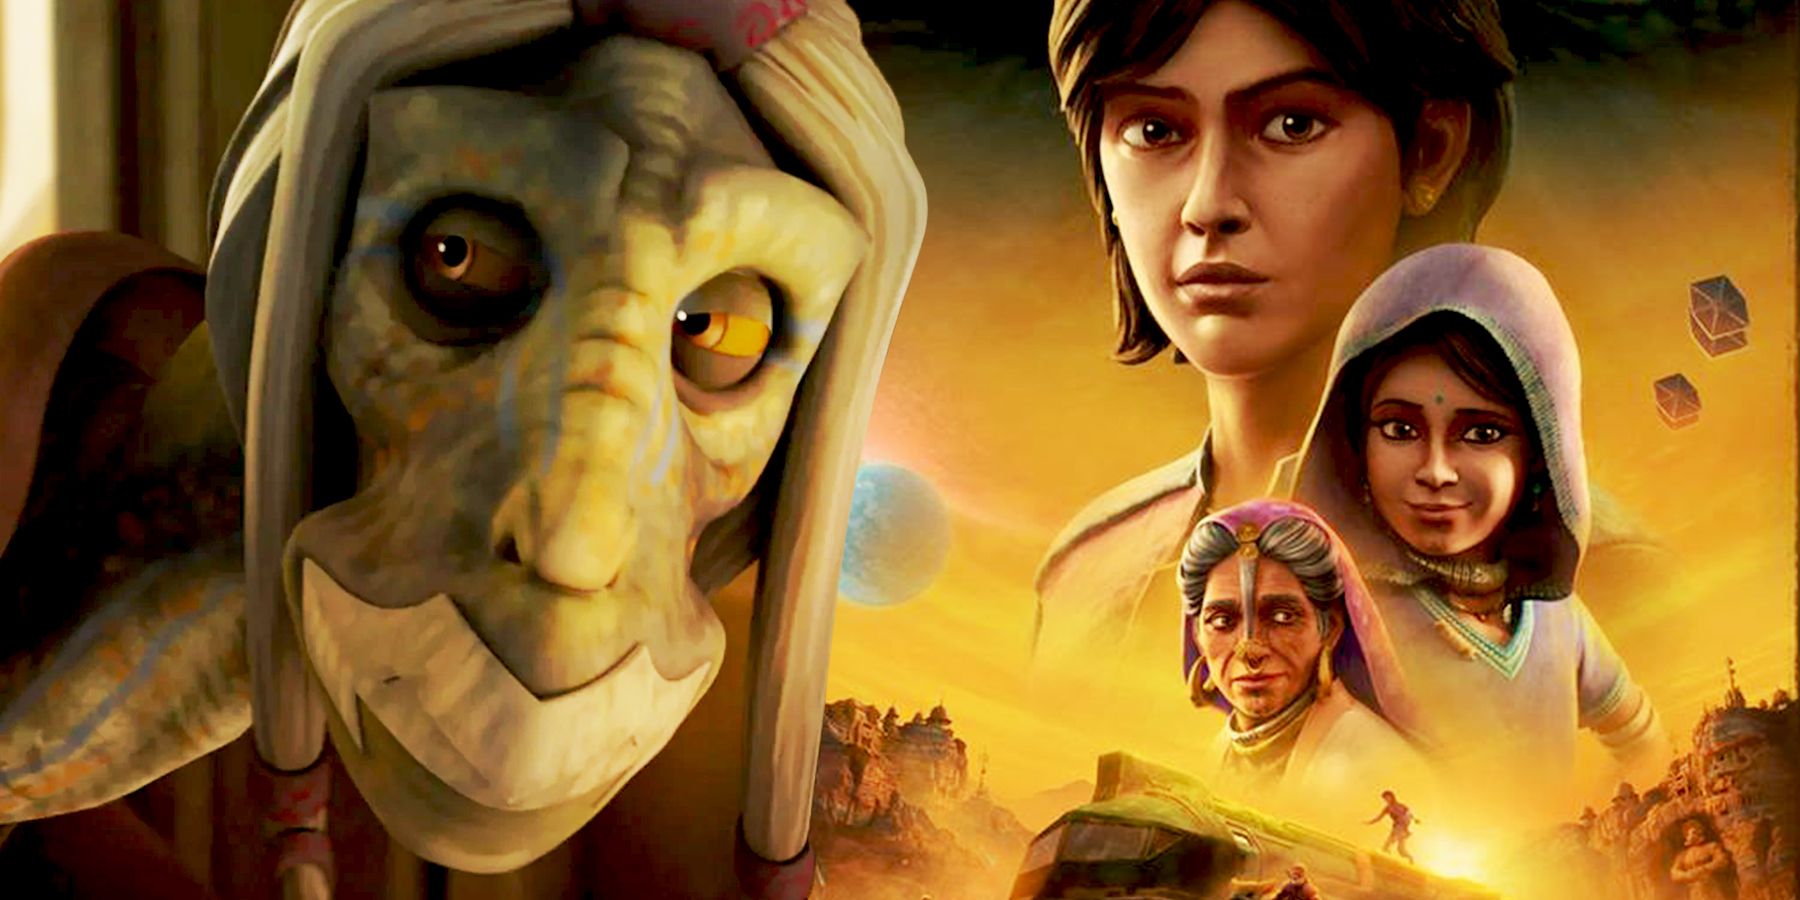 Jedi Master Tera Sinube as seen in show Star Wars: The Clone Wars and characters Runi, Rugal and Charuk from Star Wars: Visions episode The Bandits of Golak